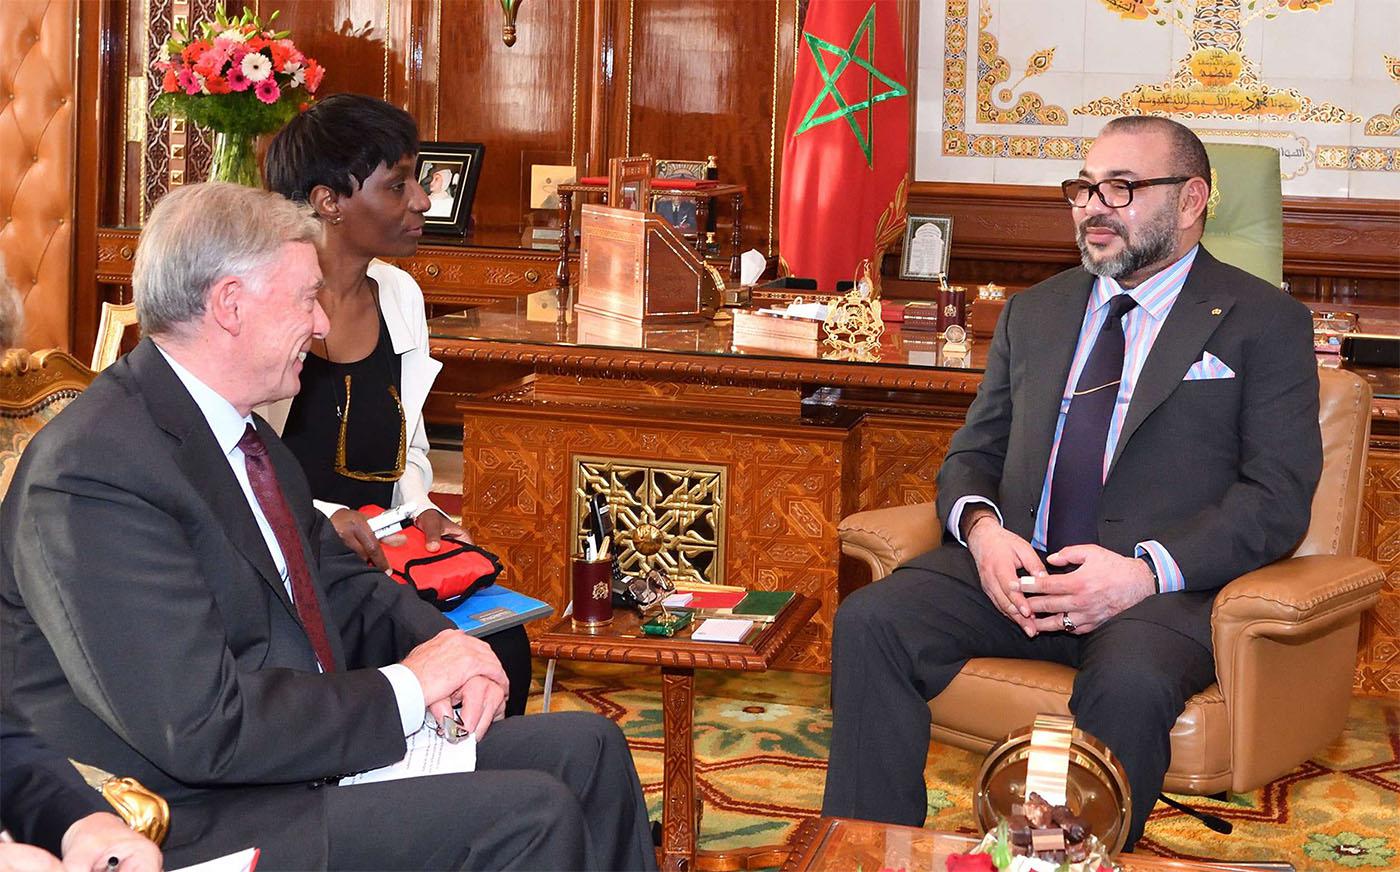 Moroccan King Mohammed VI, right, confers with UN envoy Horst Kohler at the Palace in Rabat 